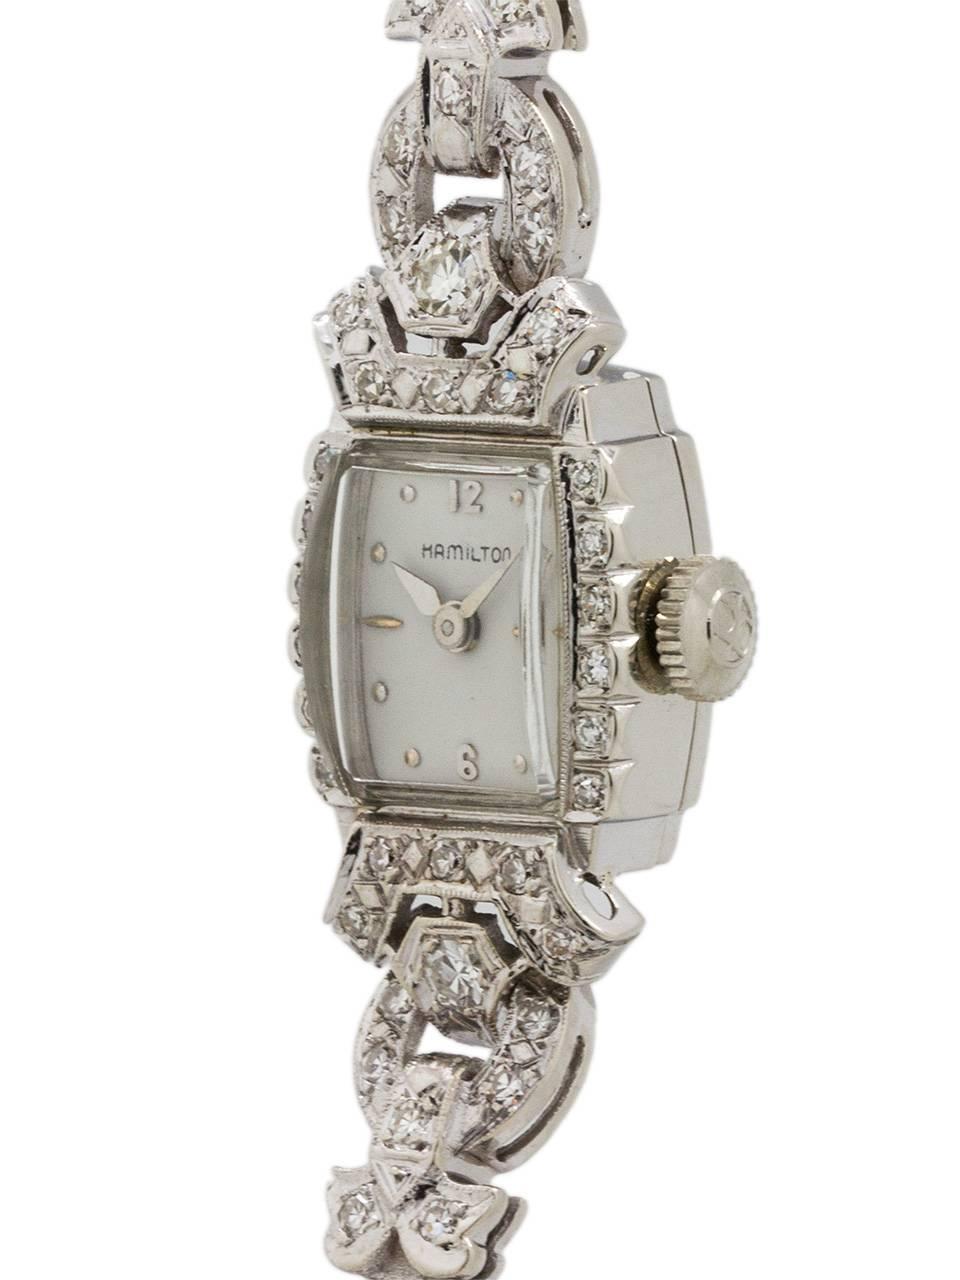 Vintage Lady Hamilton Platinum & Diamond Set Watch circa 1950's. Featuring a tonneau shaped case with hinged bracelet attachment beautifully decorated in a garland design with 2+ carats of diamonds including a prominent round brilliant cut diamond